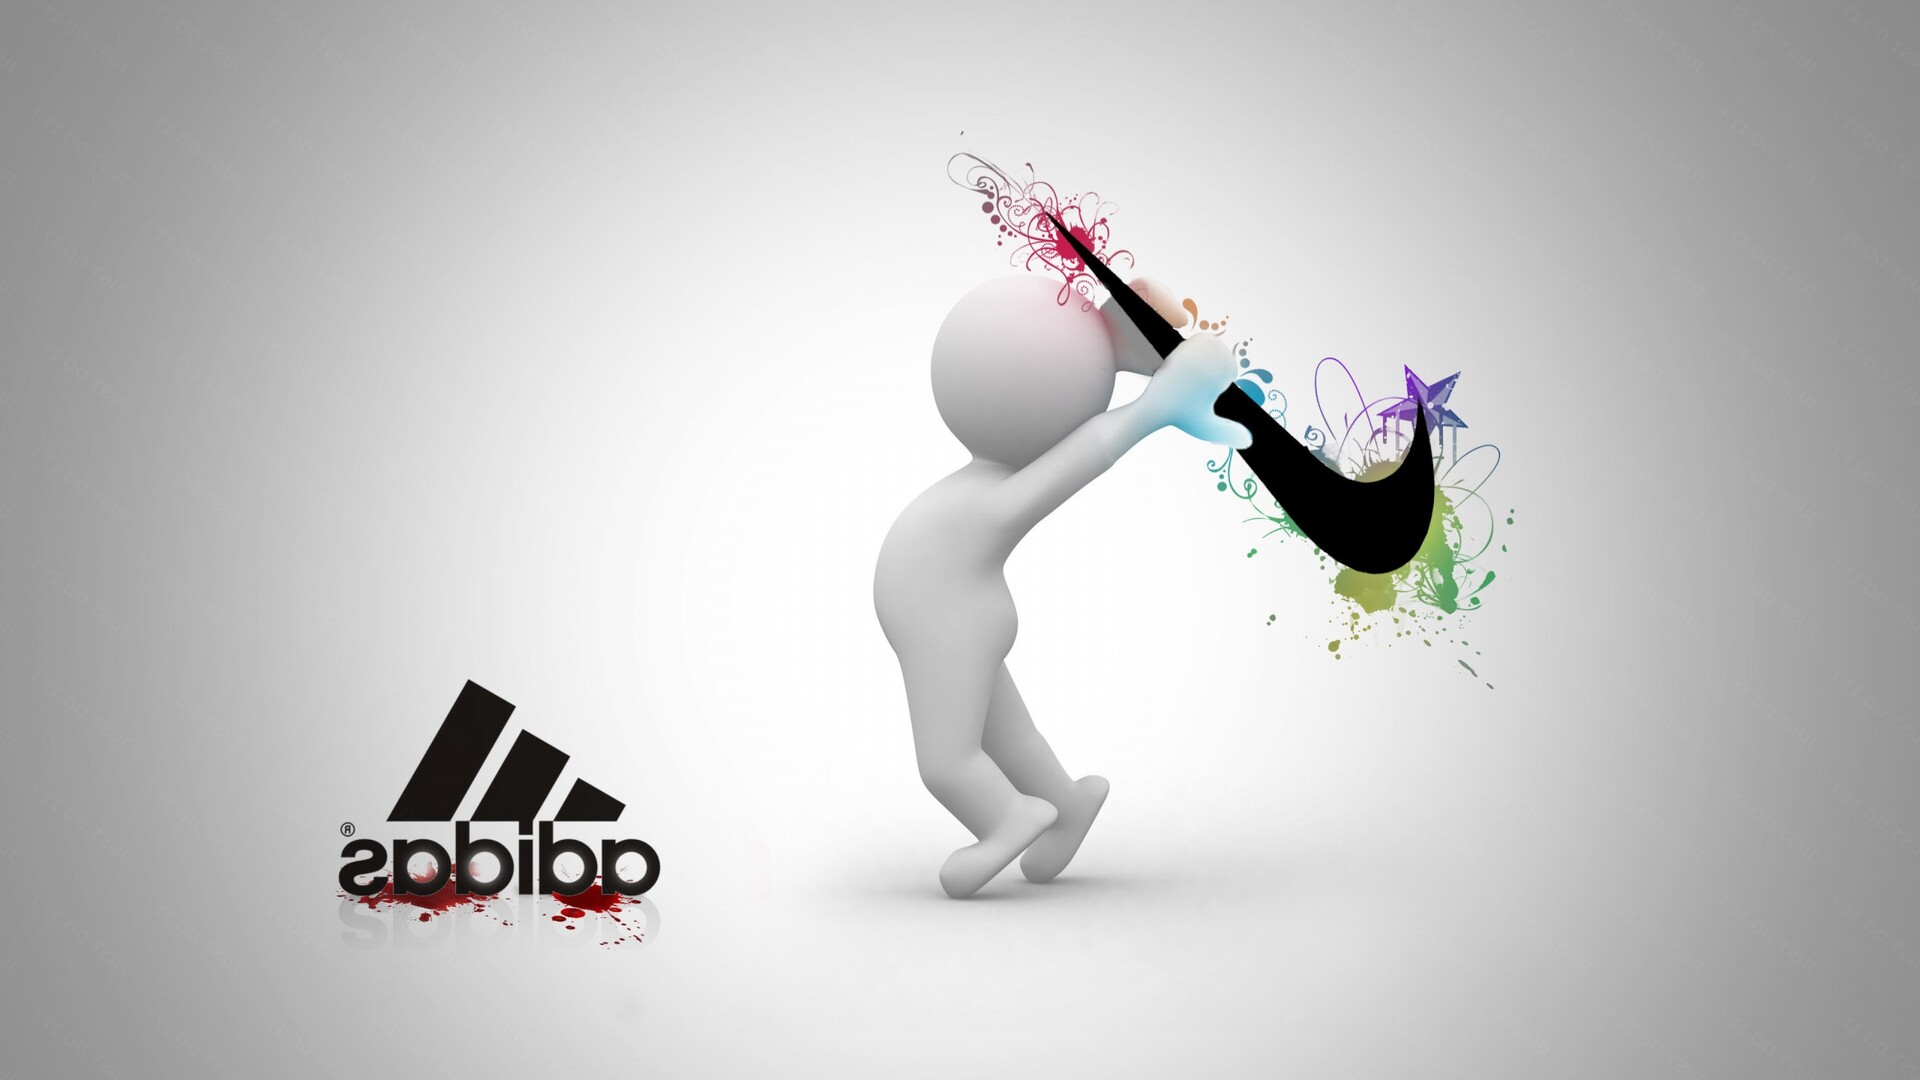 X nike vs adidas laptop full hd p hd k wallpapers images backgrounds photos and pictures